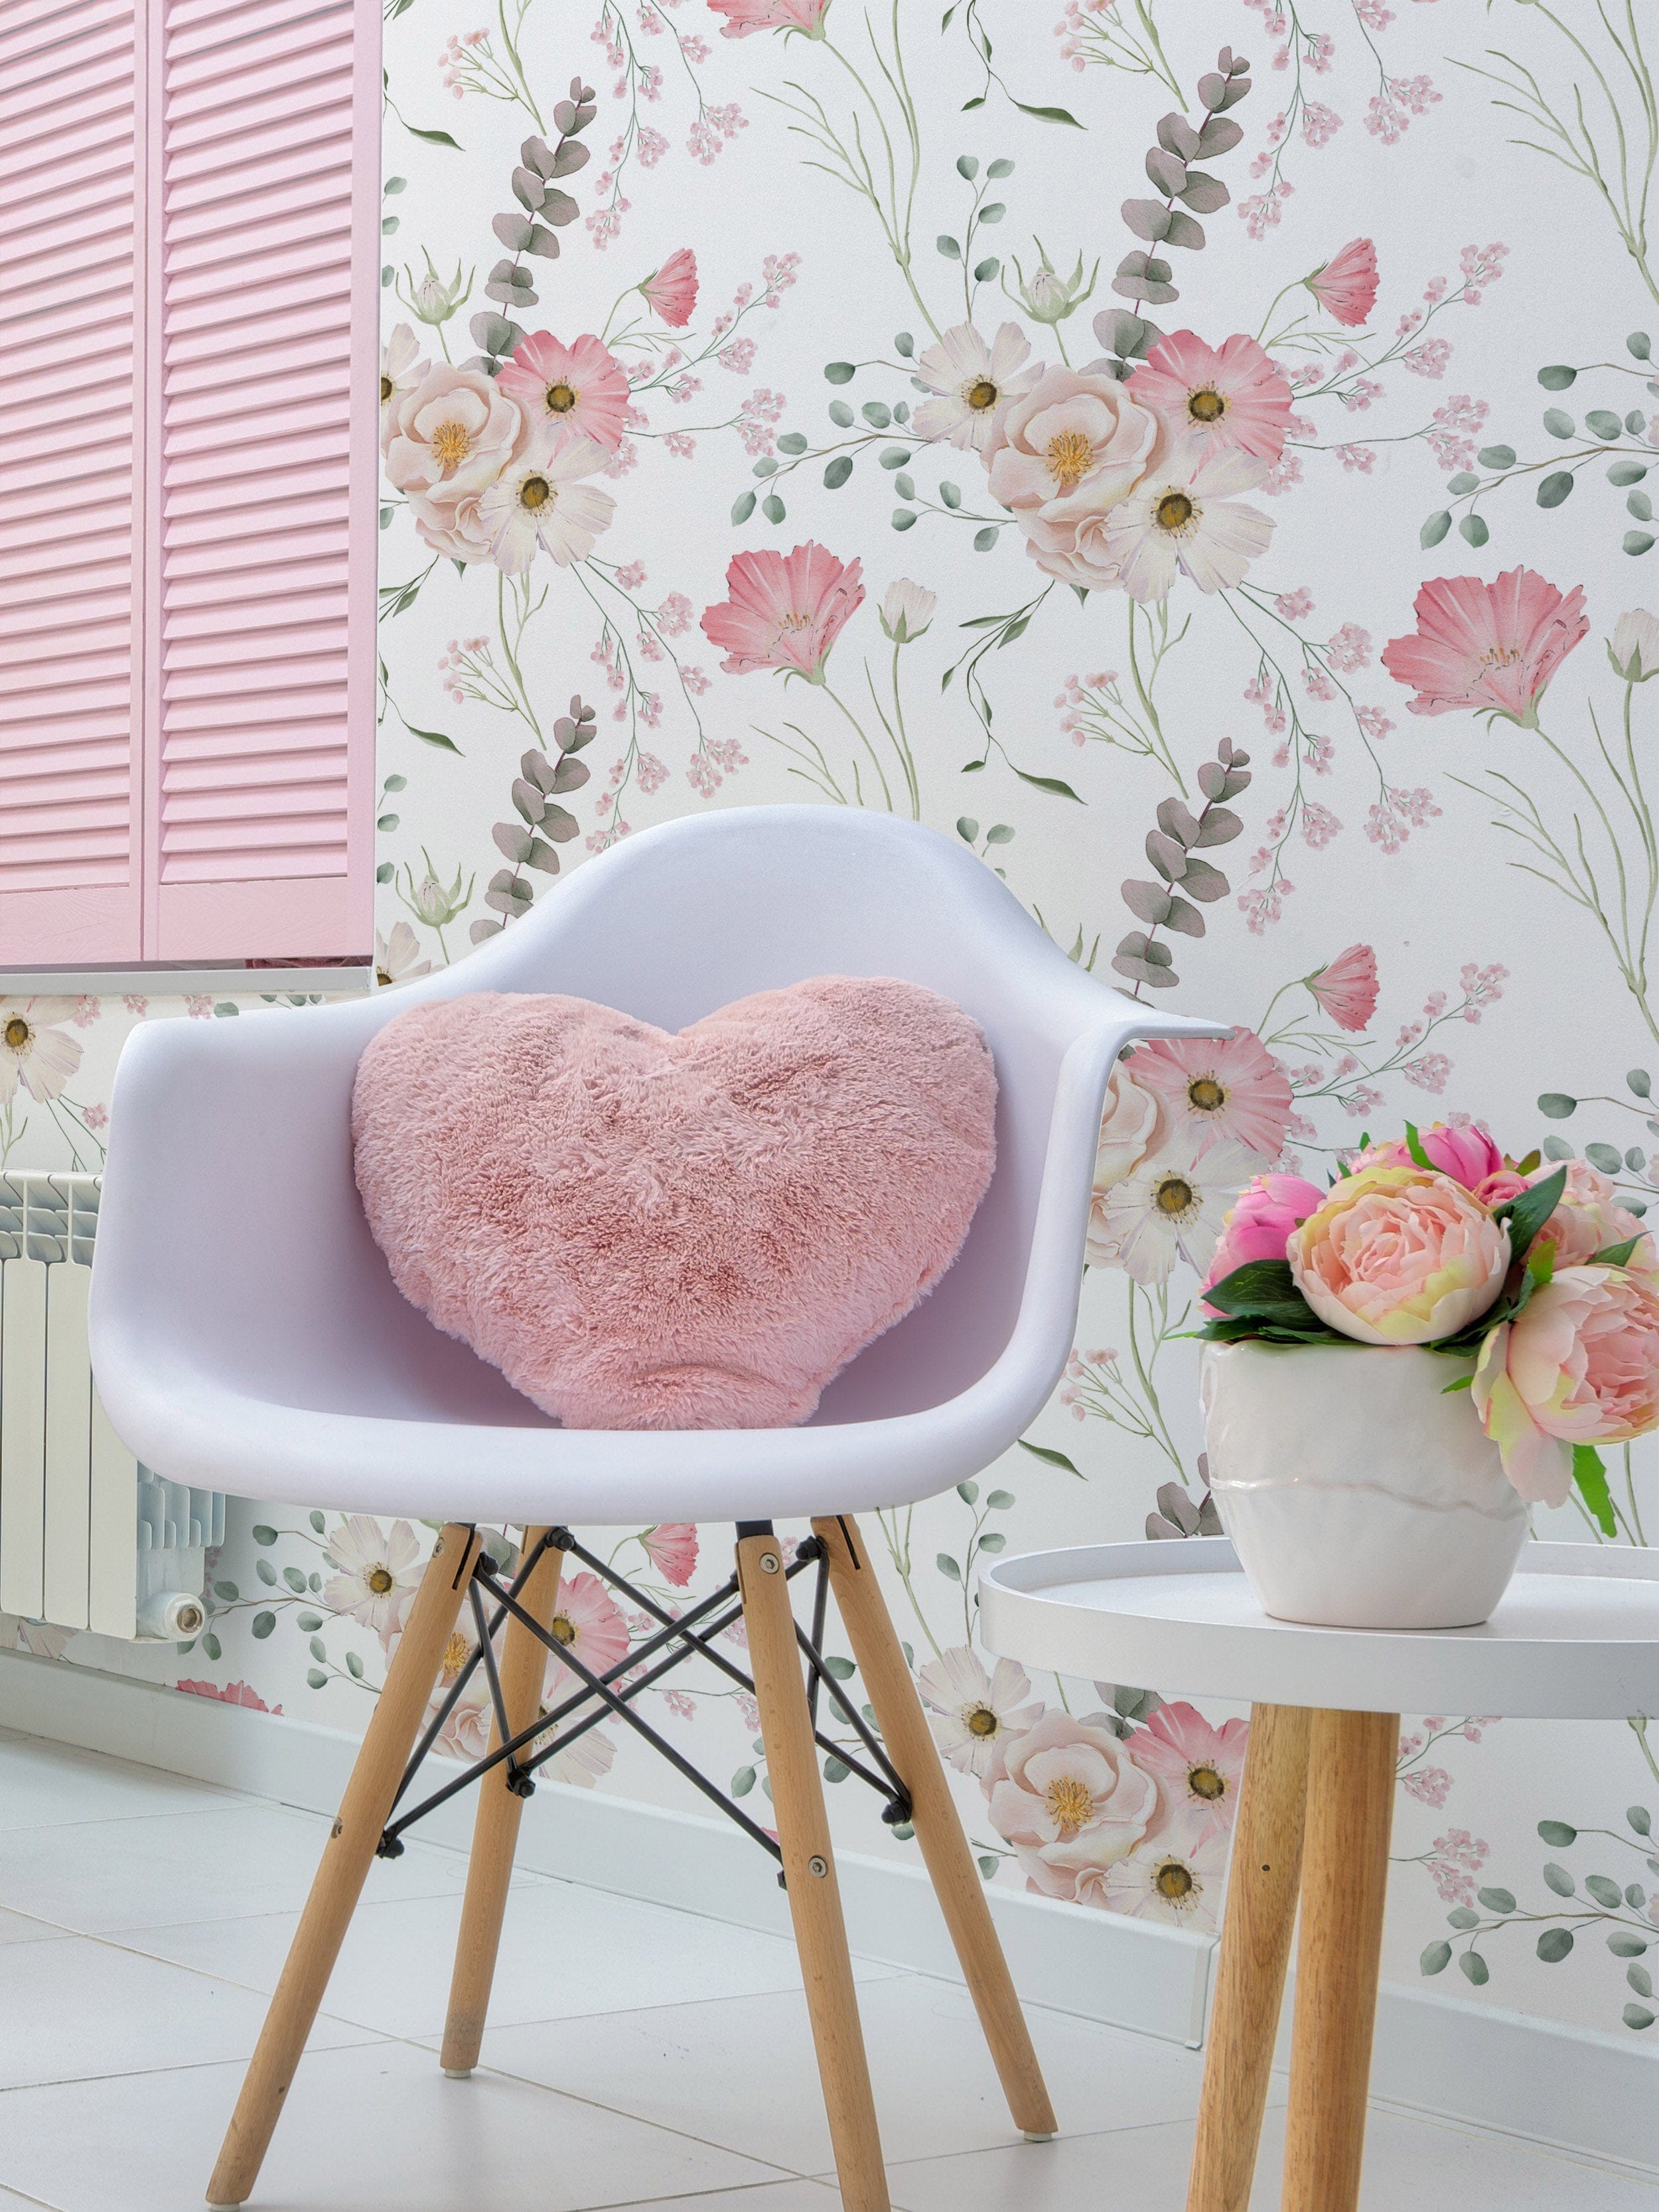 Flourish Wallpaper in a cozy living space featuring a white chair with wooden legs, a pink heart-shaped cushion, a side table with a vase of pink flowers, and a soft floral wallpaper with delicate pink and white flowers and green foliage